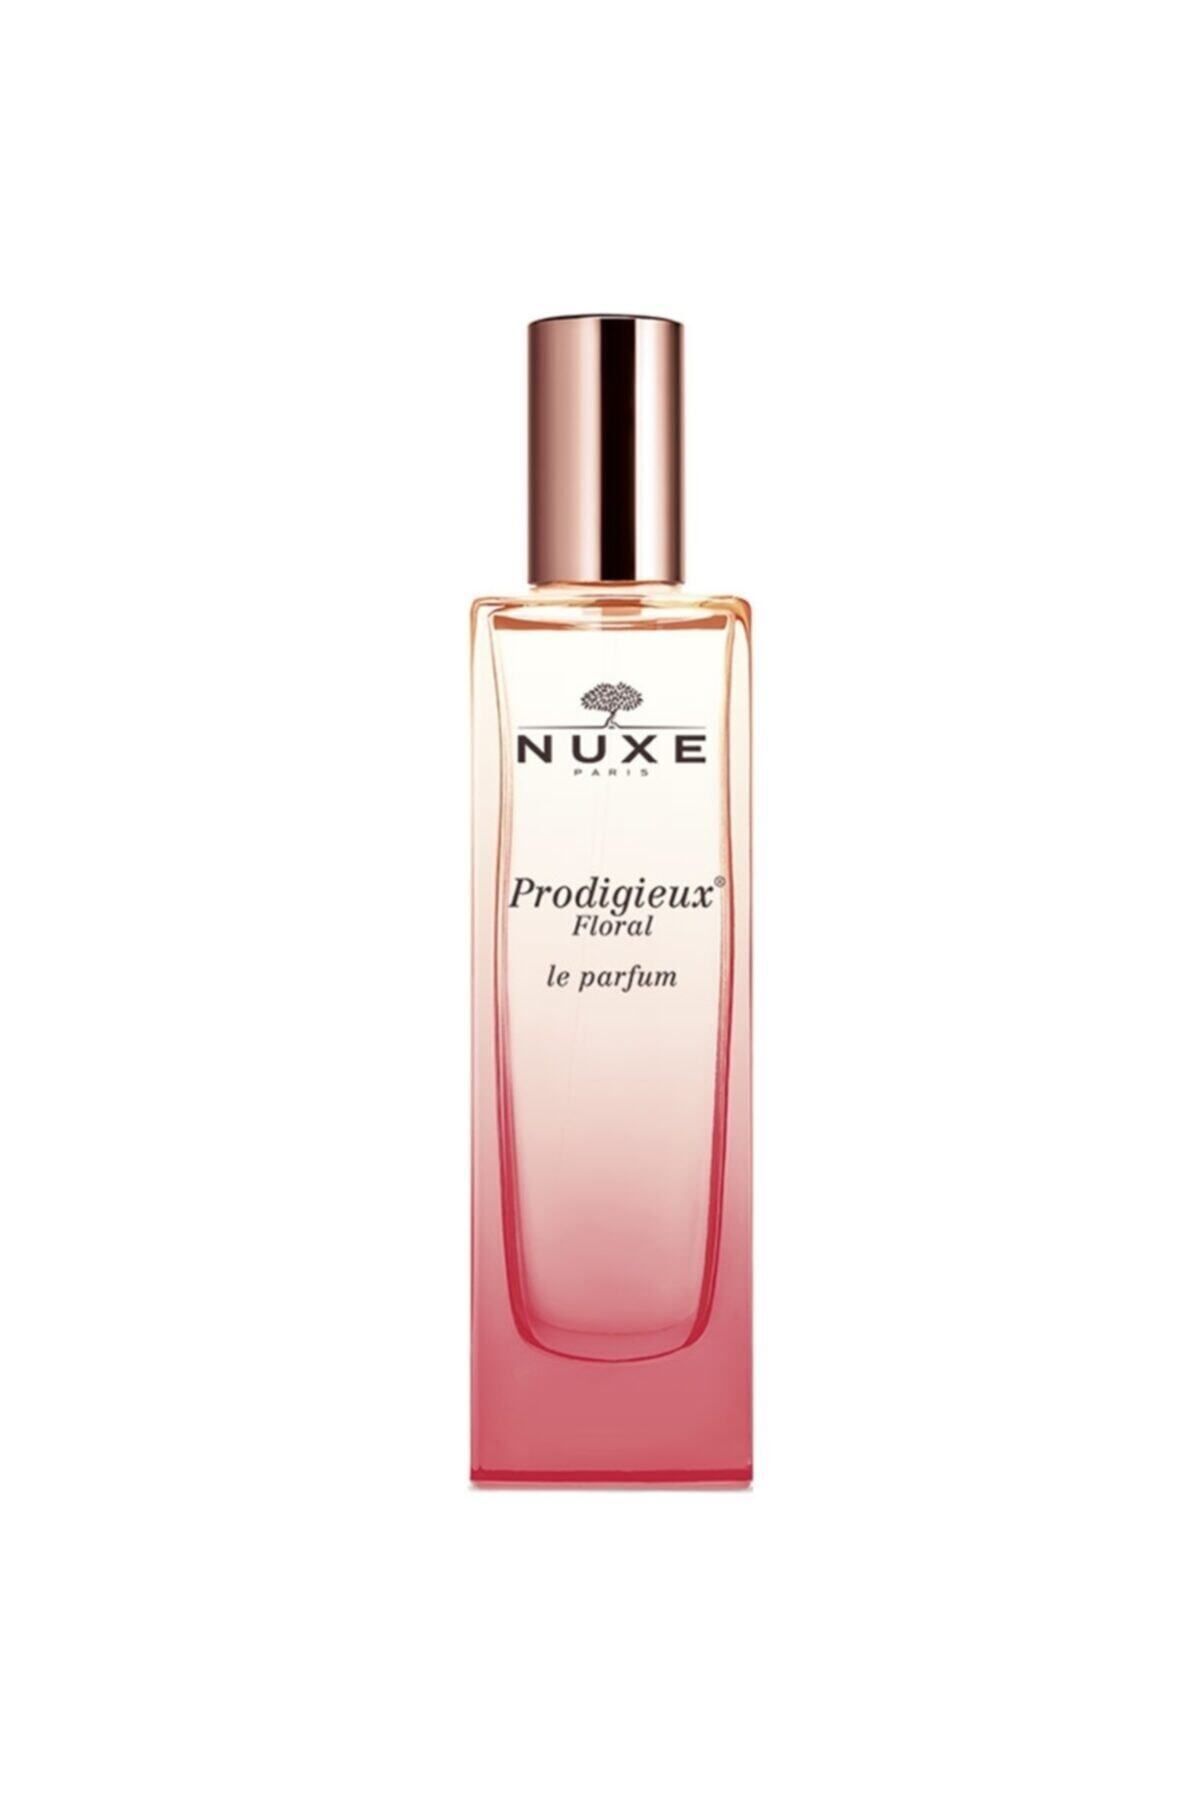 Nuxe EDP INTENSE ESSENCE WOMEN'S PERFUME WİTH NATURAL INGREDİENTS 50 ML DEMBA1203